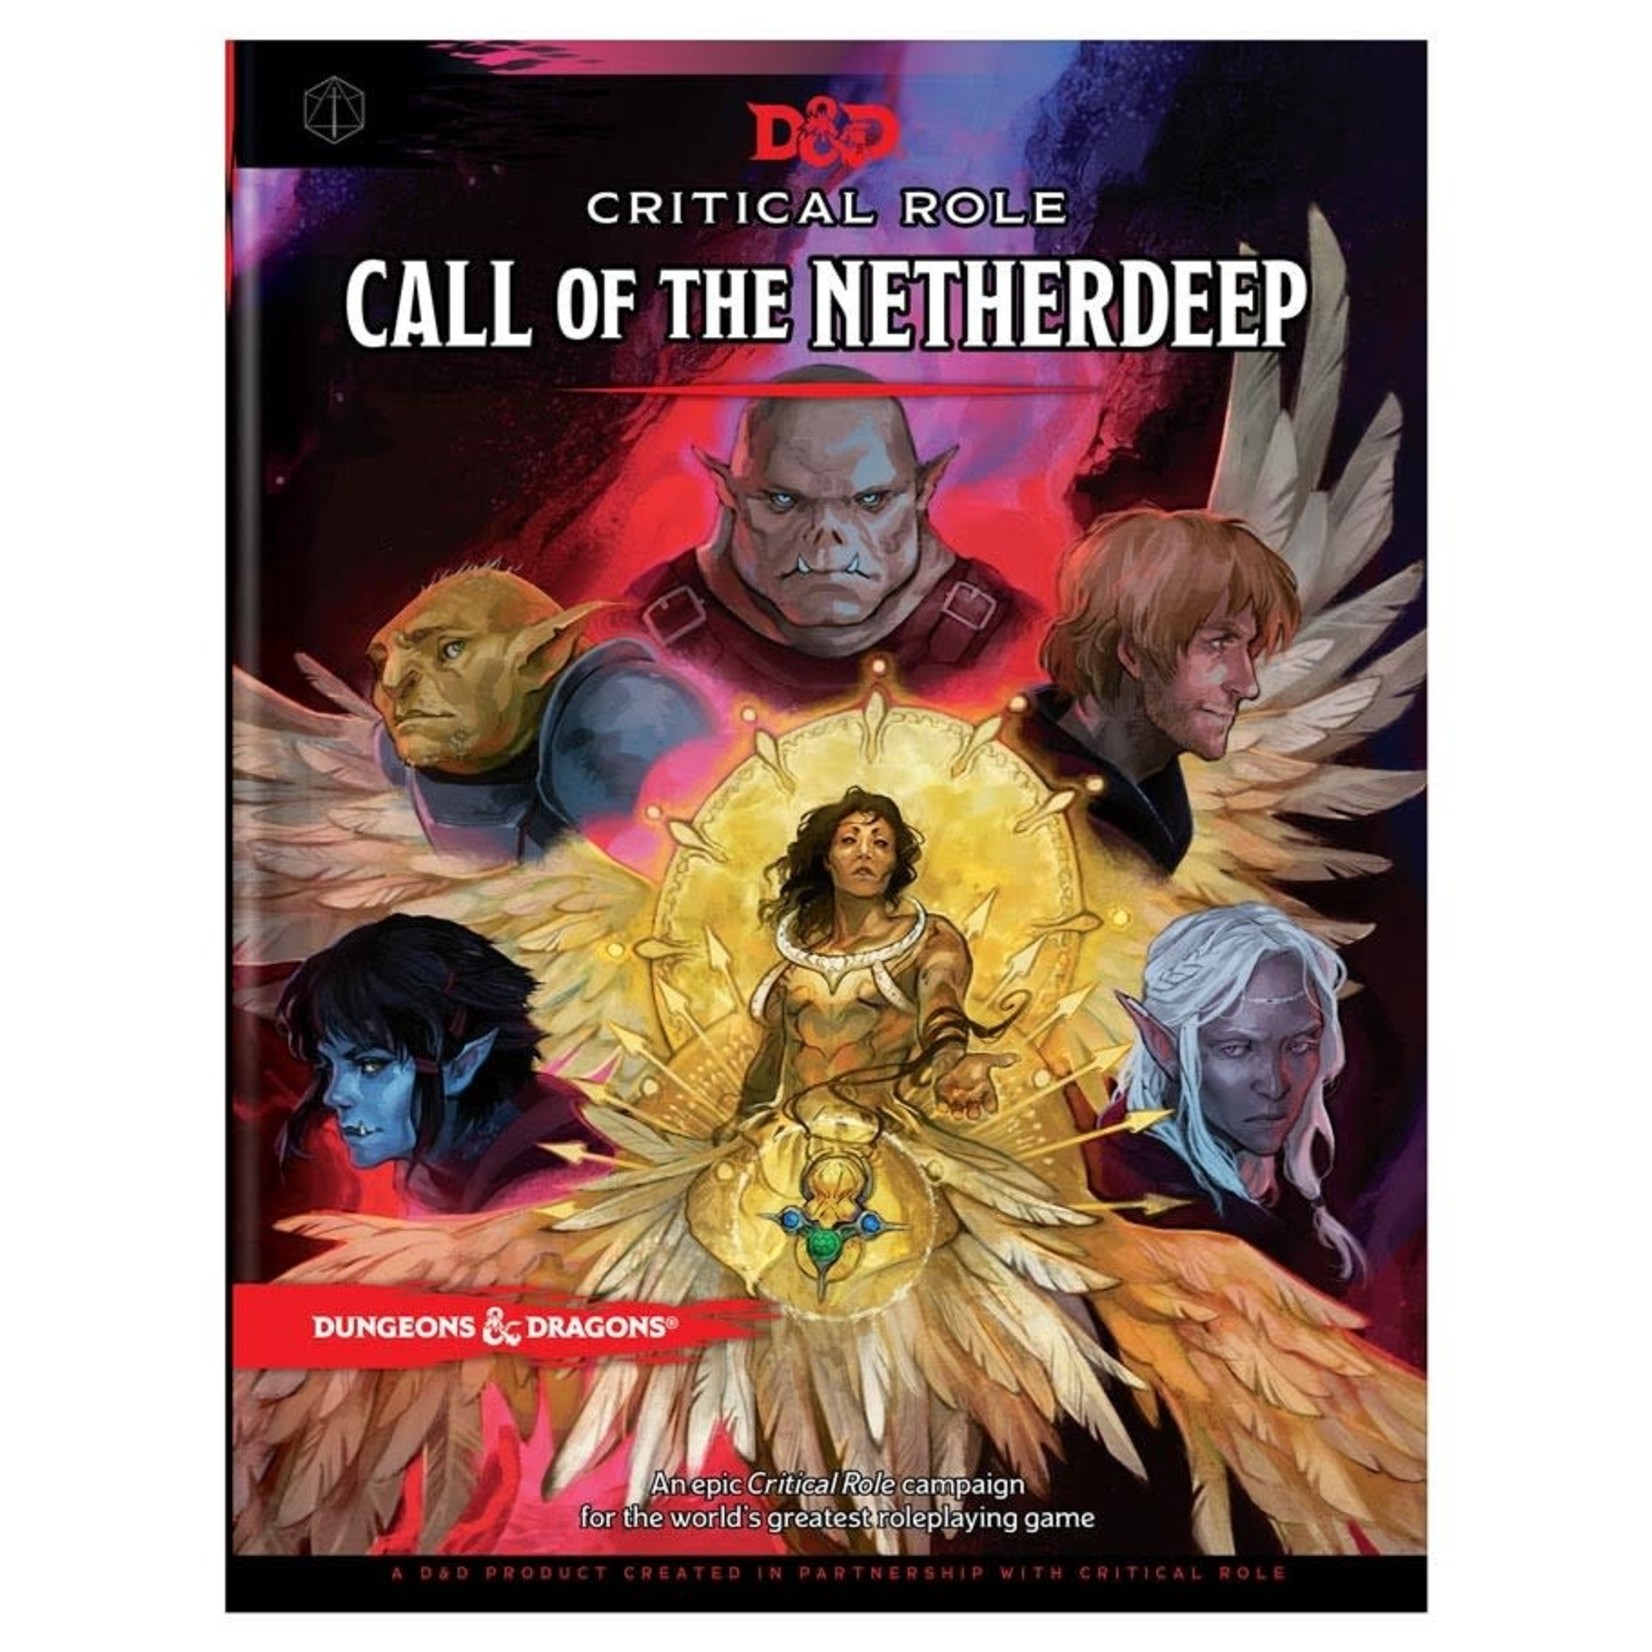 D&D 5E RPG: Call of the Netherdeep Critical Role